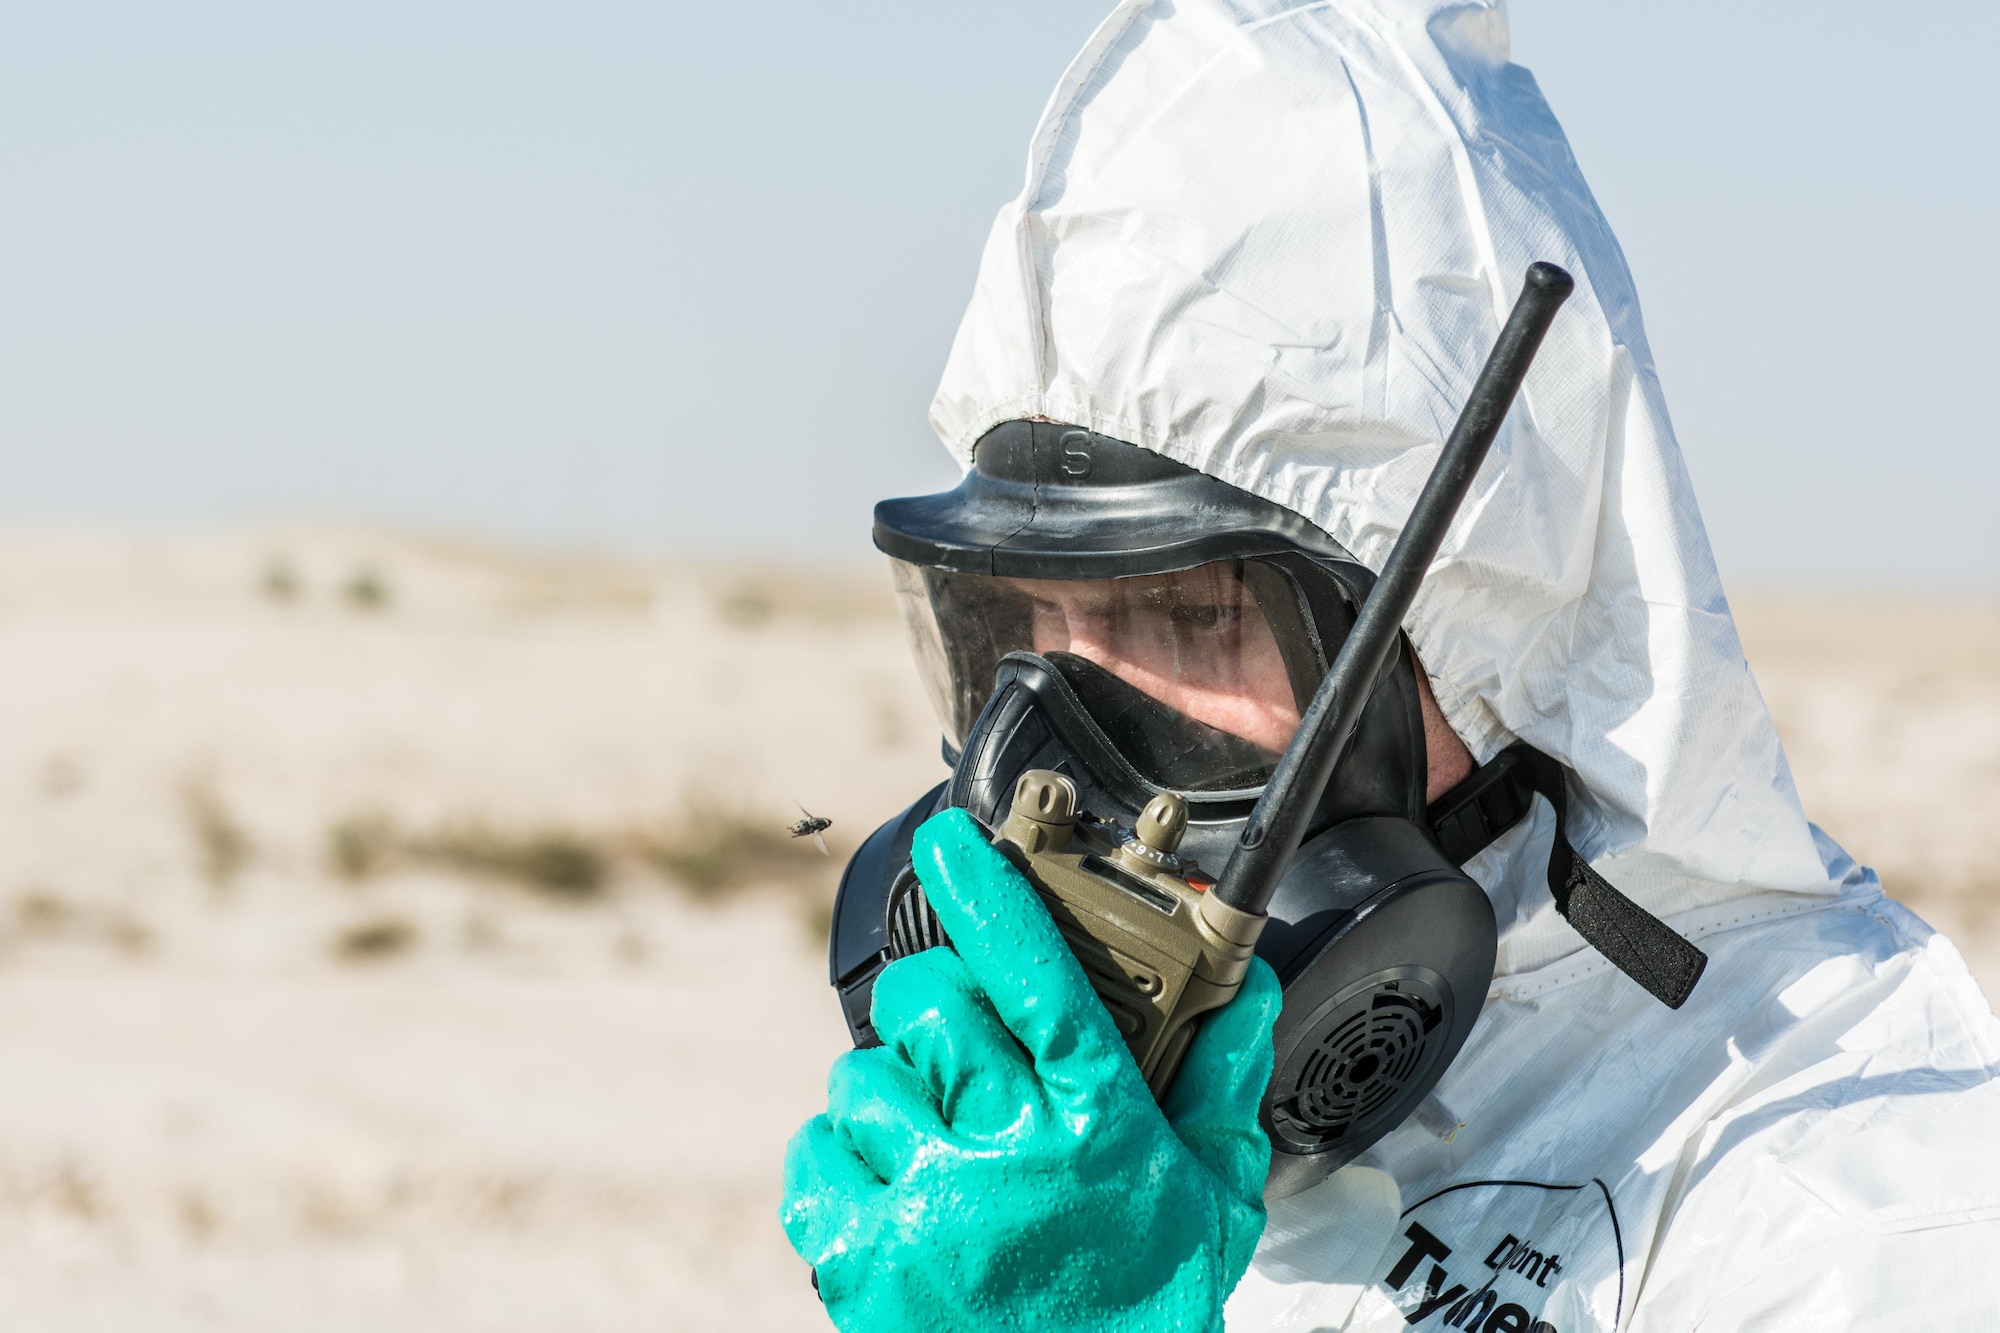 Multiple base agencies conduct a joint chemical response exercise